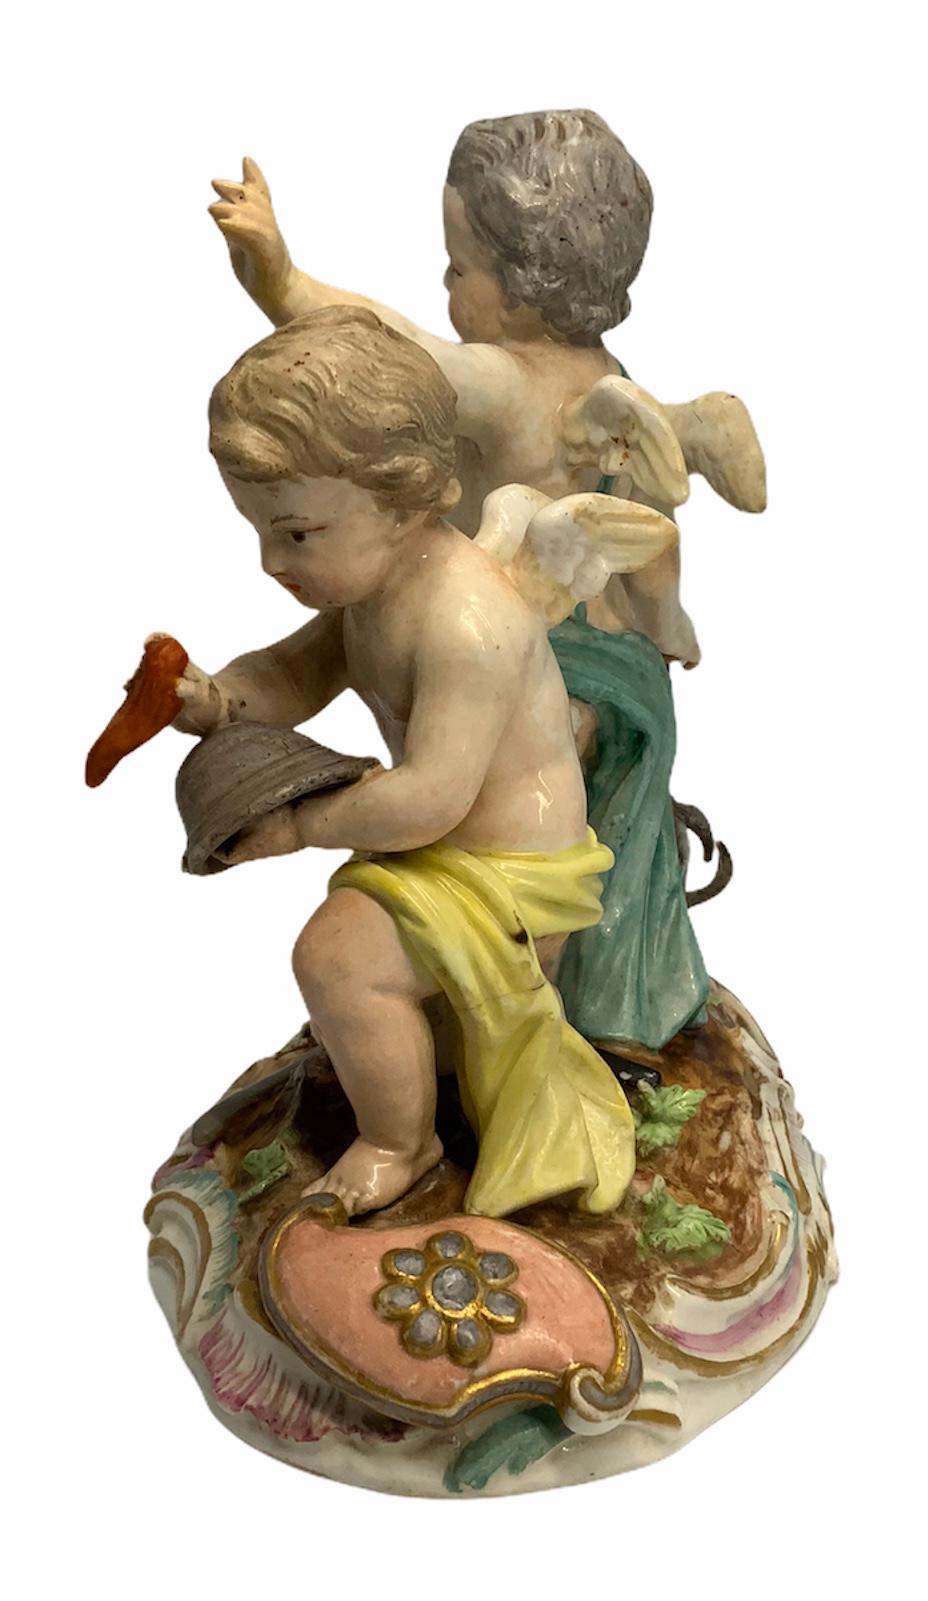 Royal Porcelain or State’s Porcelain Manufactory 'KPM' Cherub’s Sculpture In Good Condition For Sale In Guaynabo, PR